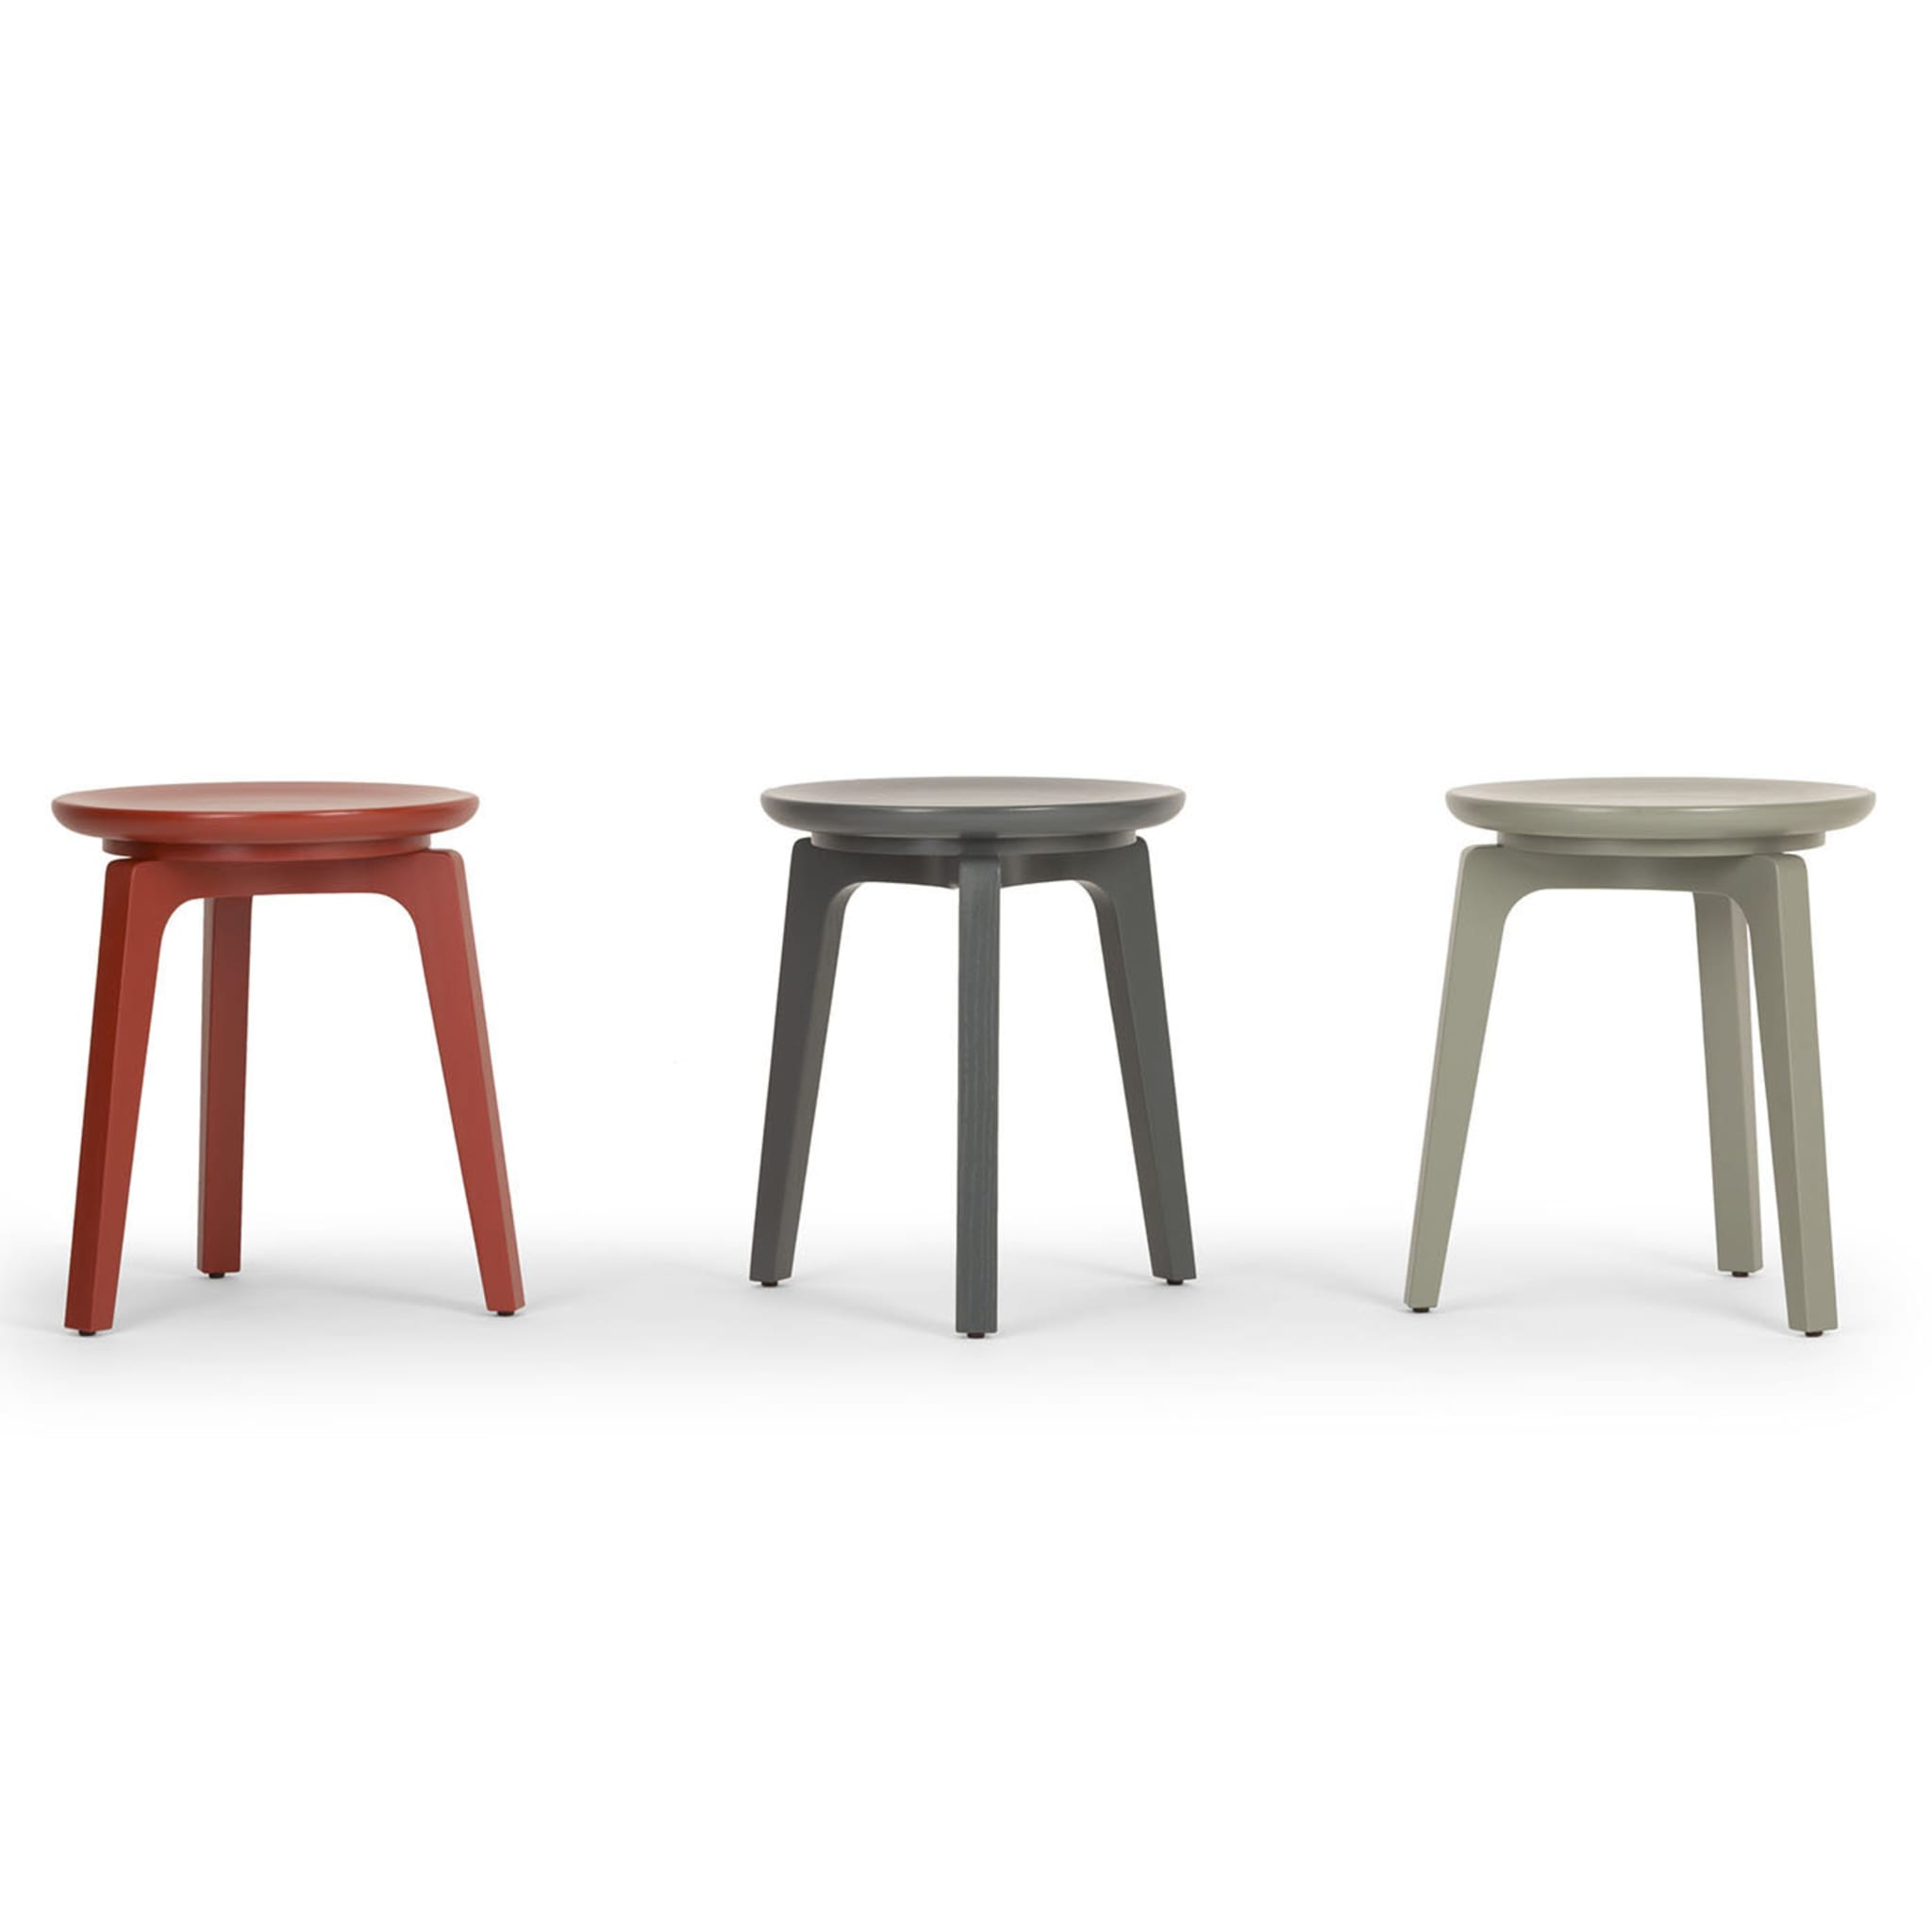 Tod Red Low Stool - Alternative view 1